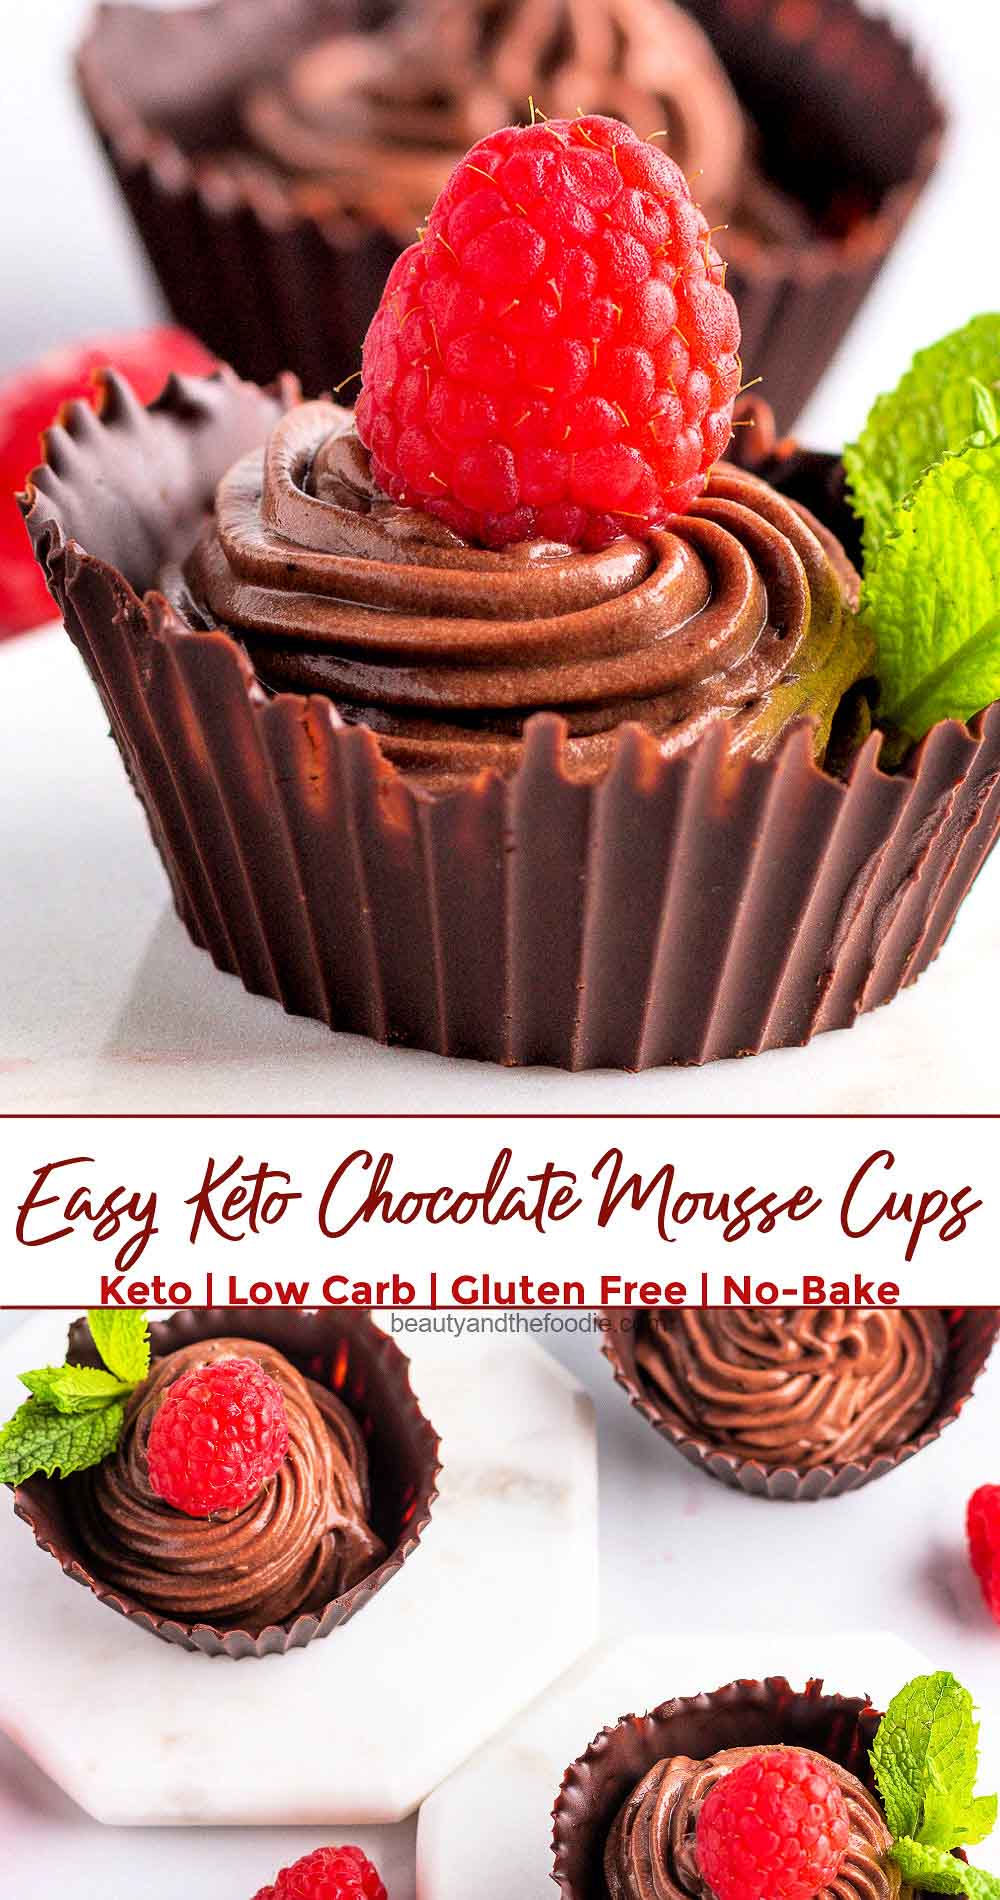 Four chocolate cups filled with chocolate mousse and topped with a raspberry.